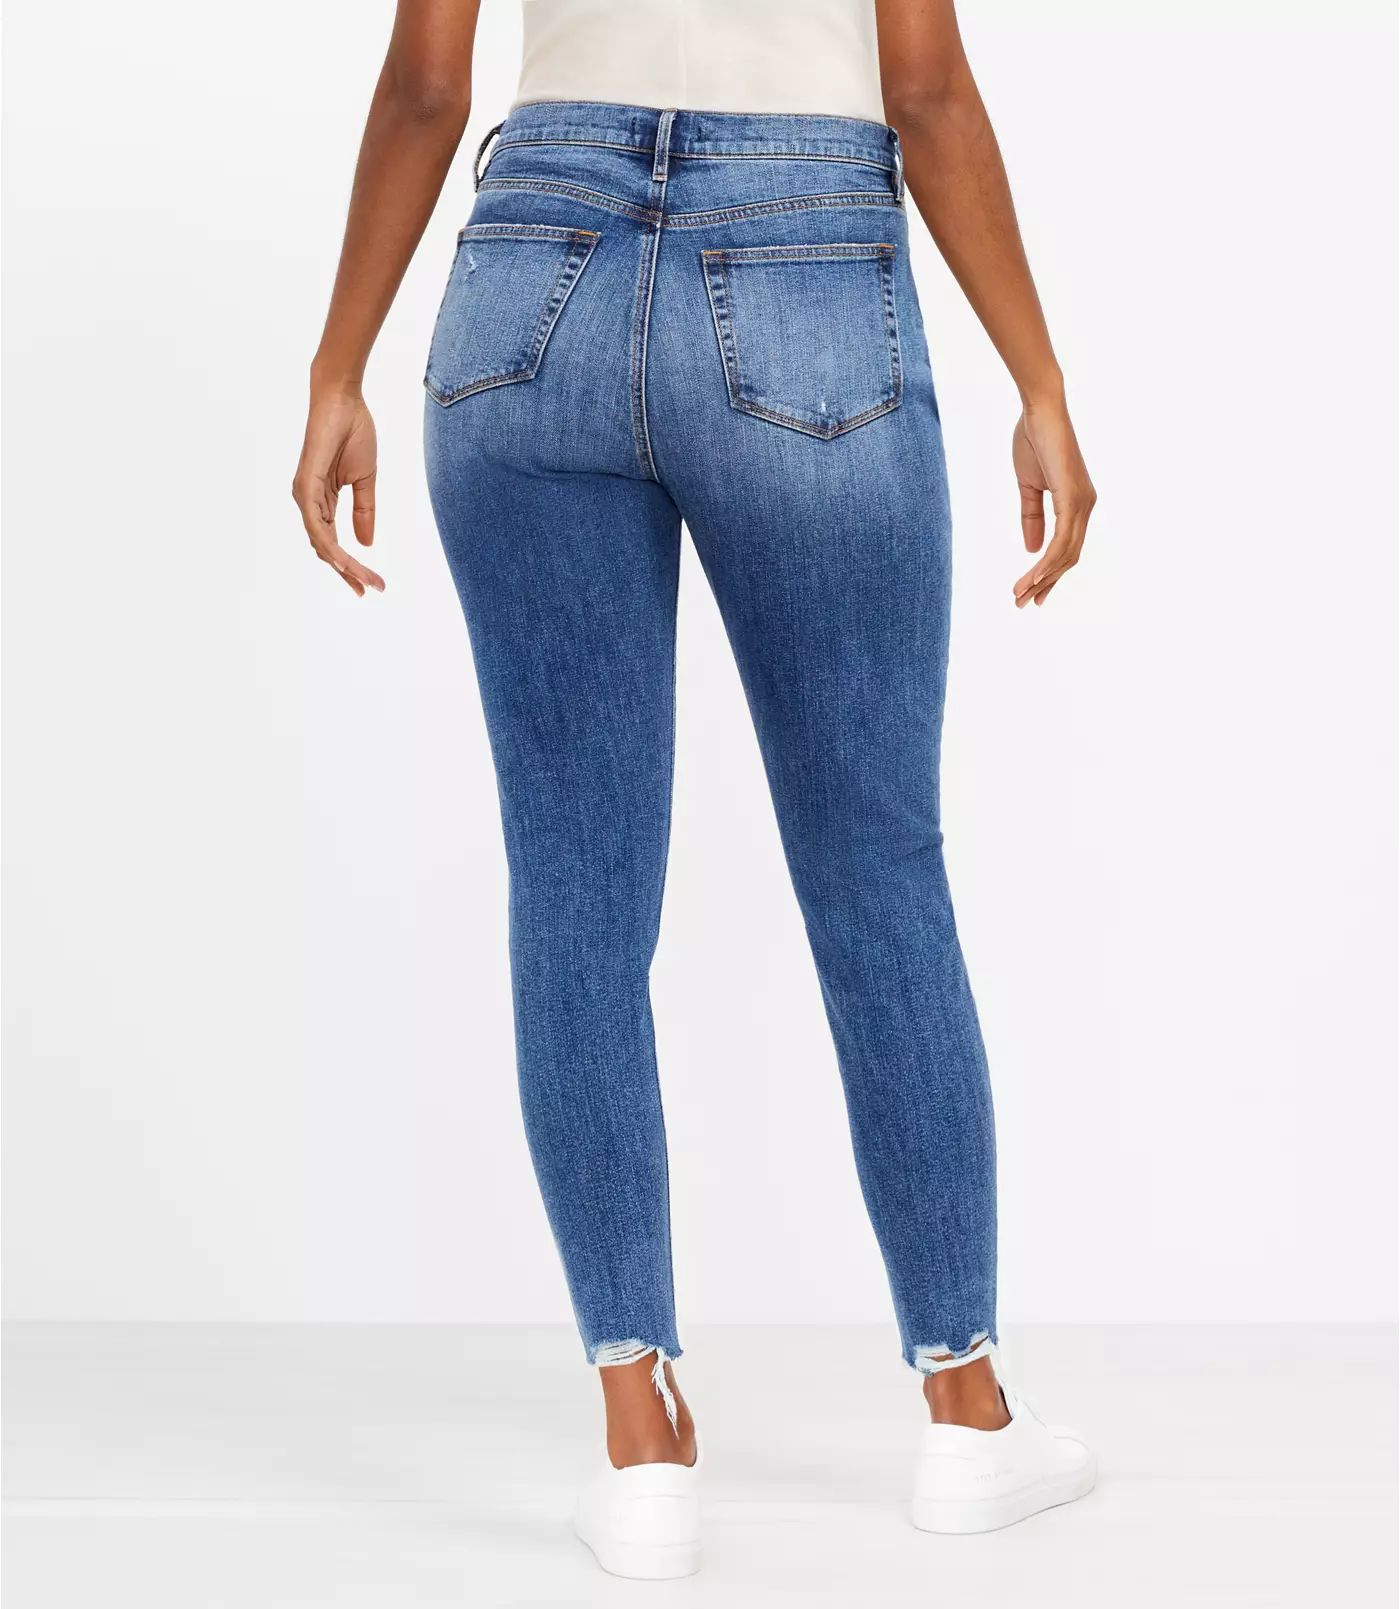 The Curvy Fresh Cut High Waist Skinny Ankle Jean in Authentic Mid Vintage Wash | LOFT